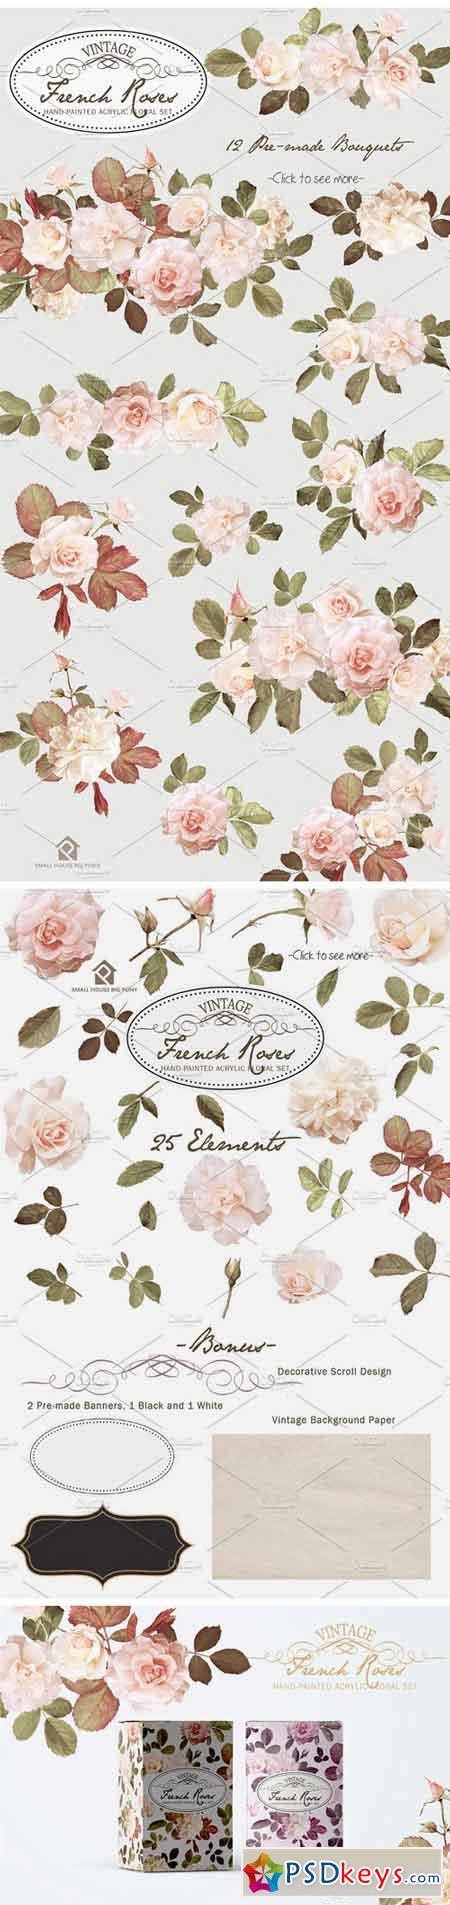 Vintage French Roses - Acrylic Paint 1213134